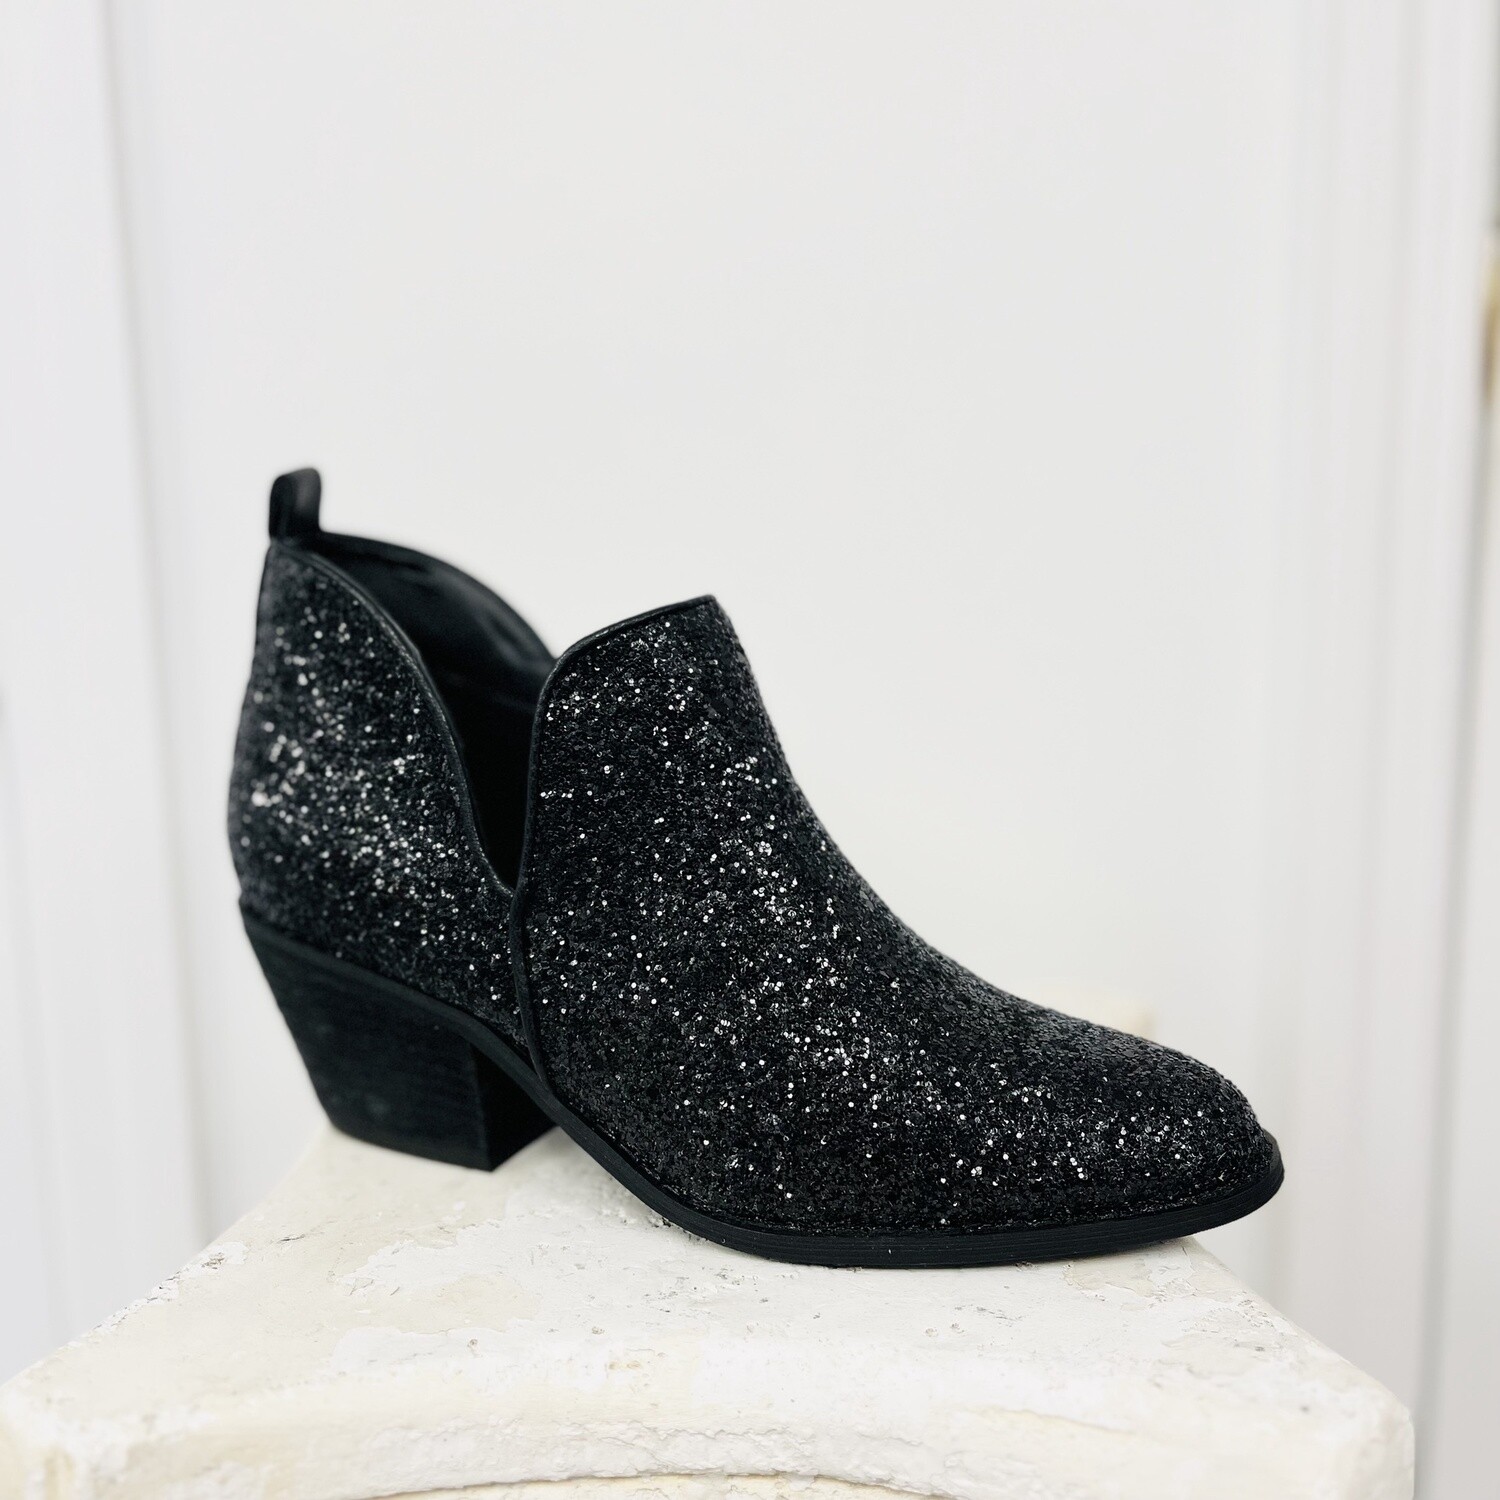 Corkys Boutique Black Glow Up Slip-On Ankle Bootie